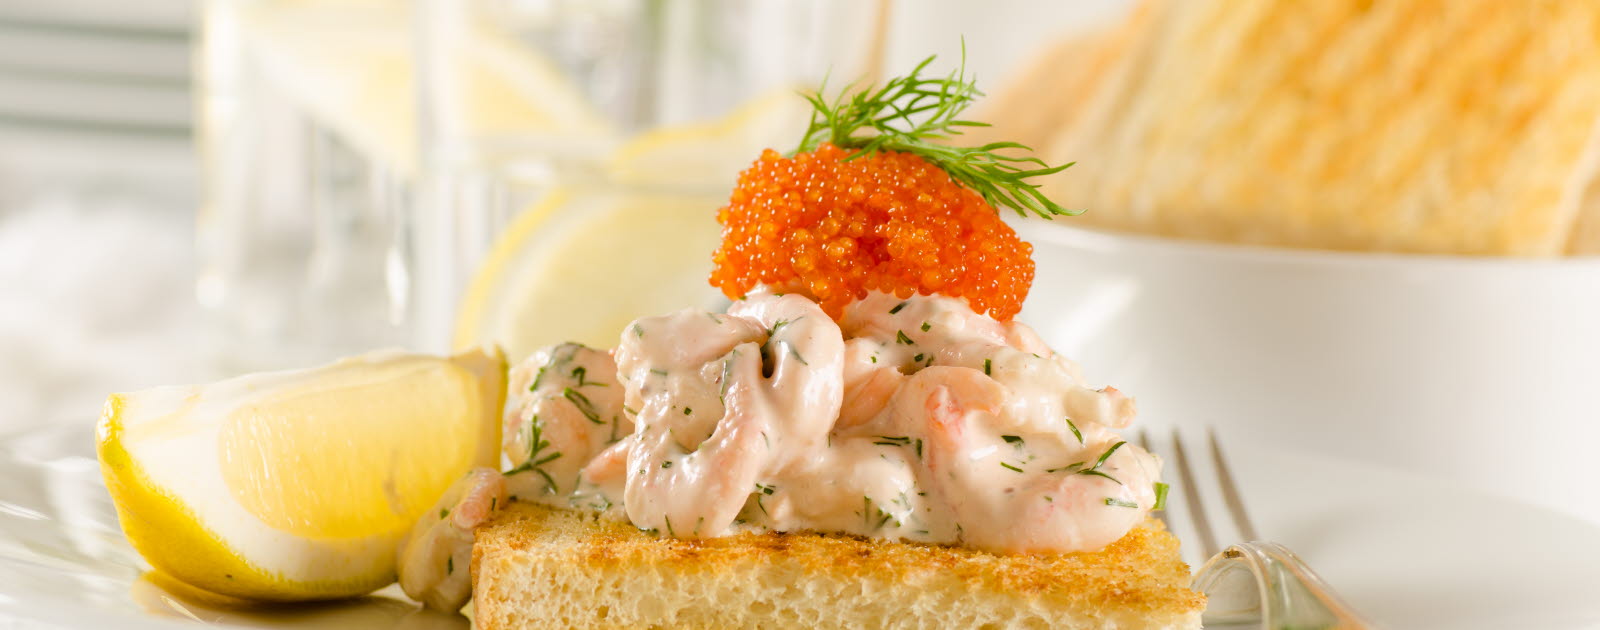 Toast with a creamy shrimp salad and roe with a lemon slice on the side on a plate.